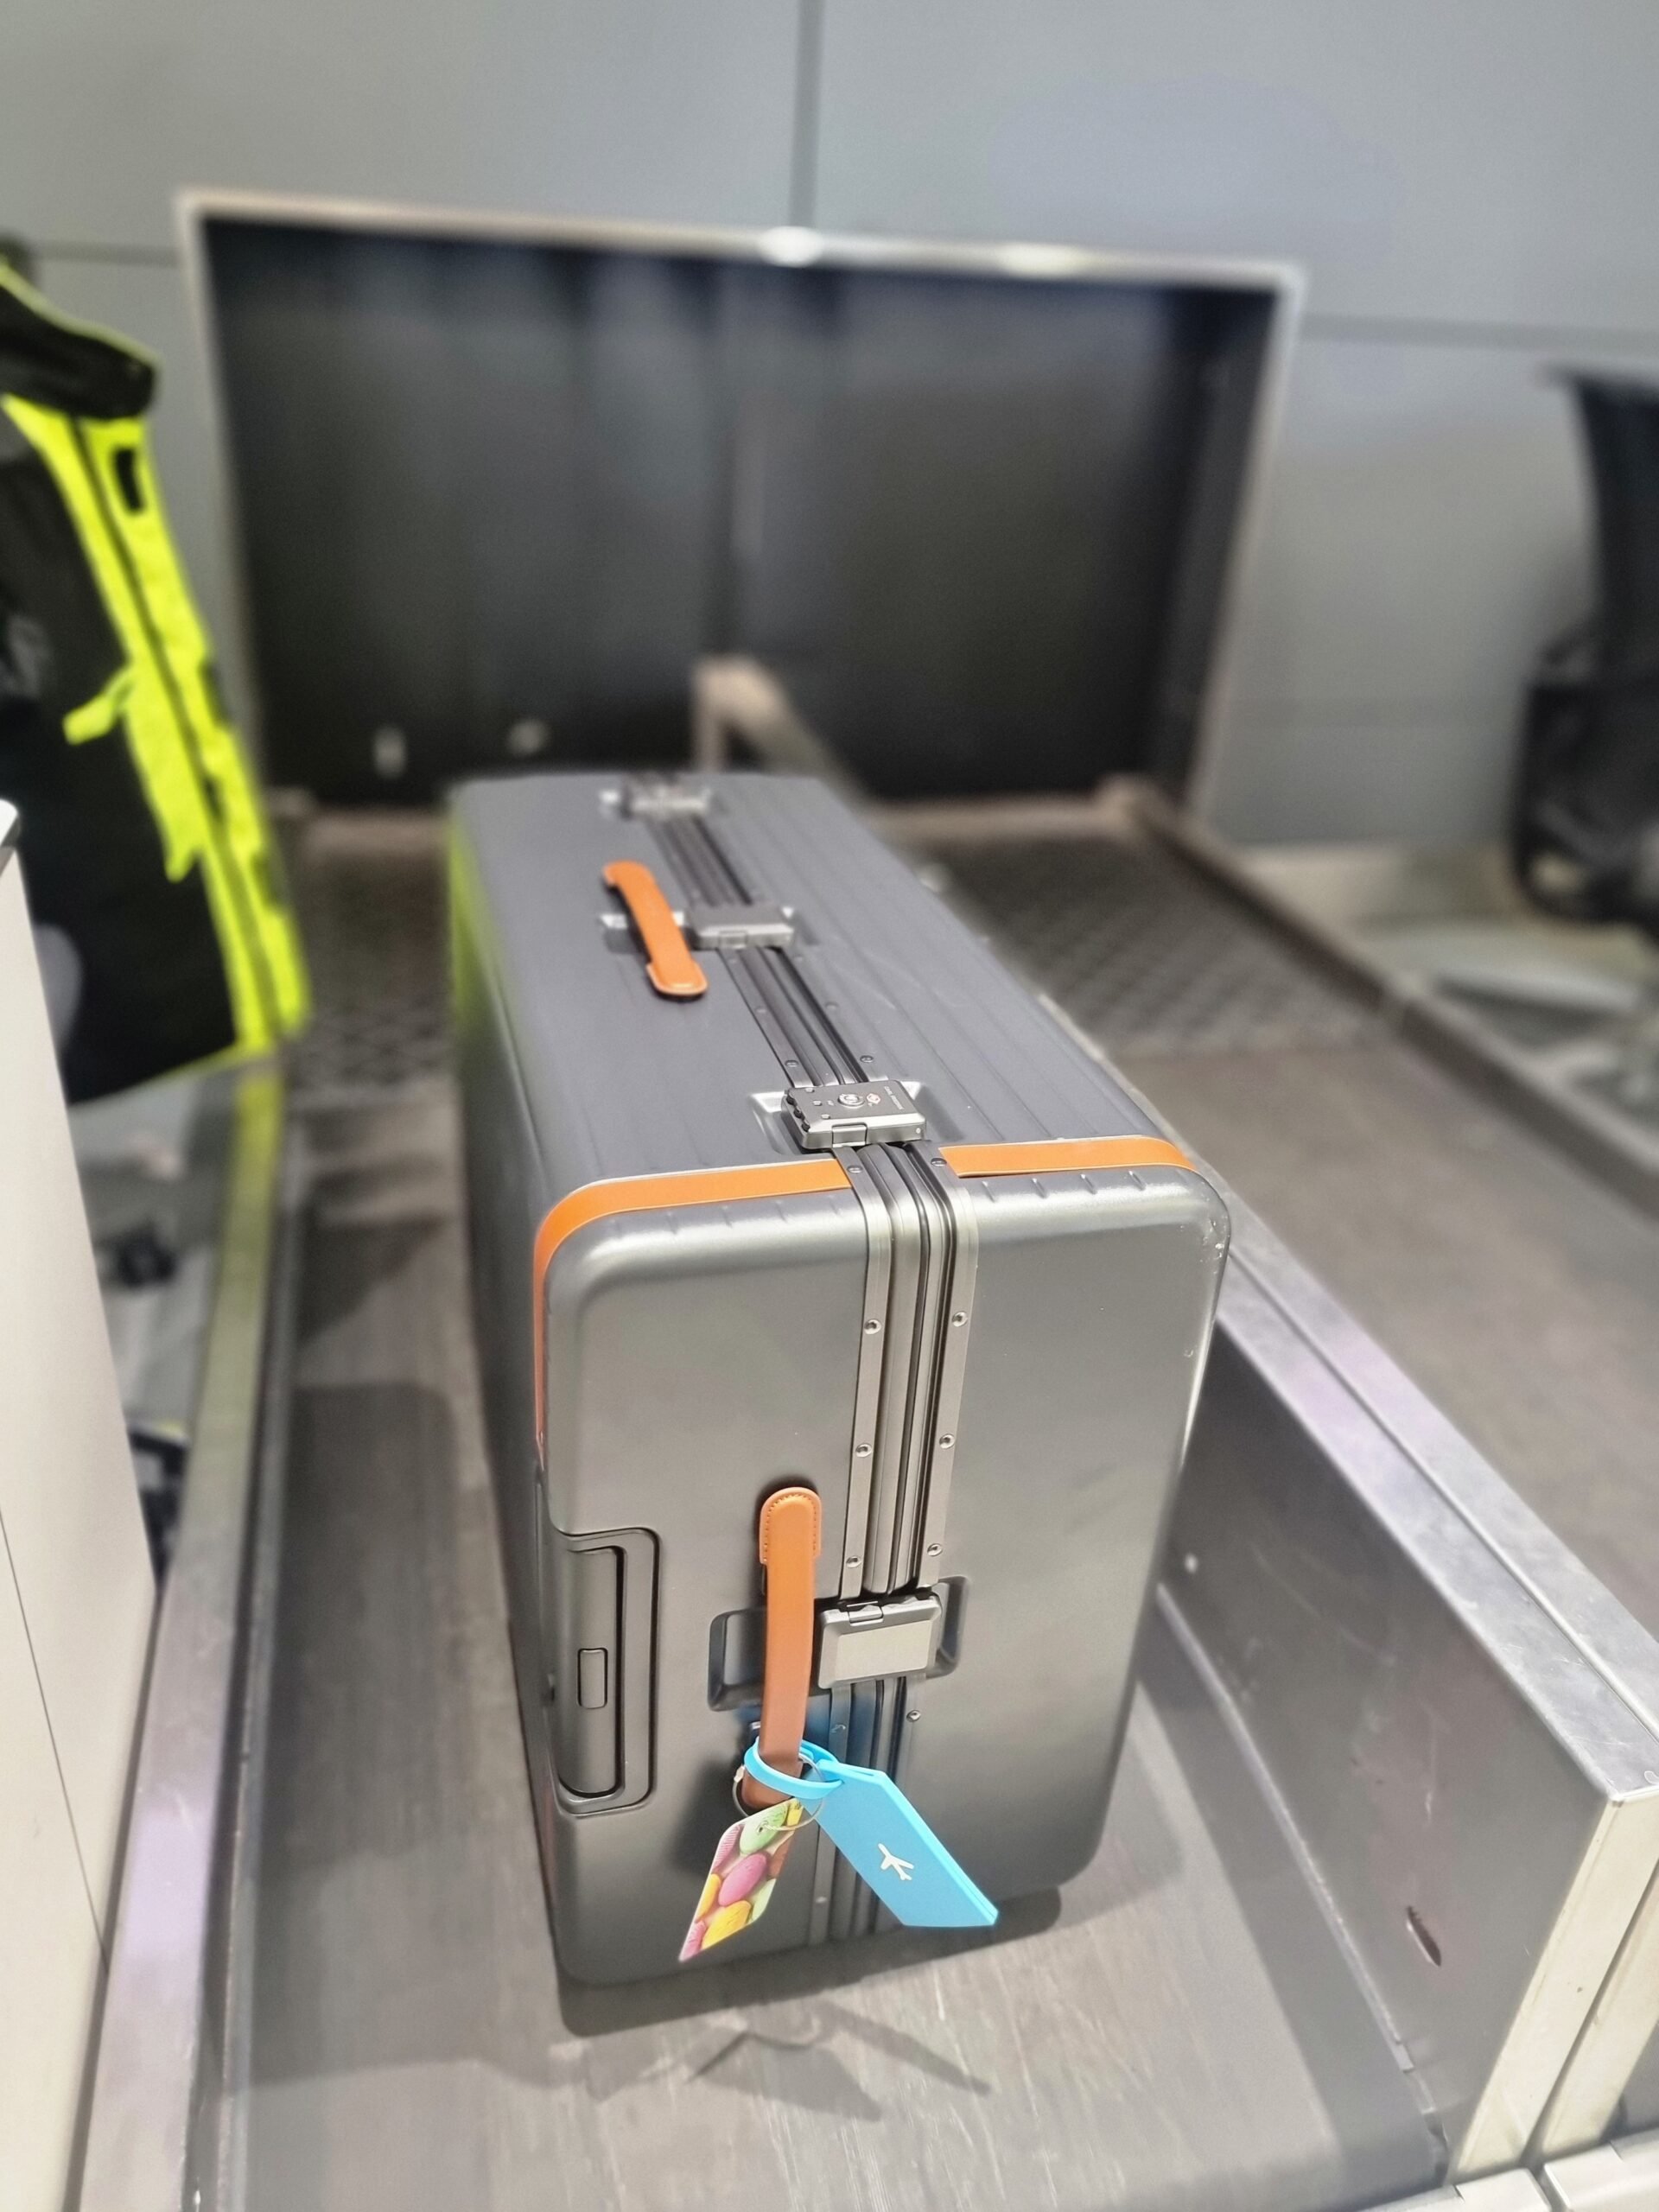 A Carl Friedrik - The Check-in zipperless suitcase sitting on a conveyor belt at an airport.